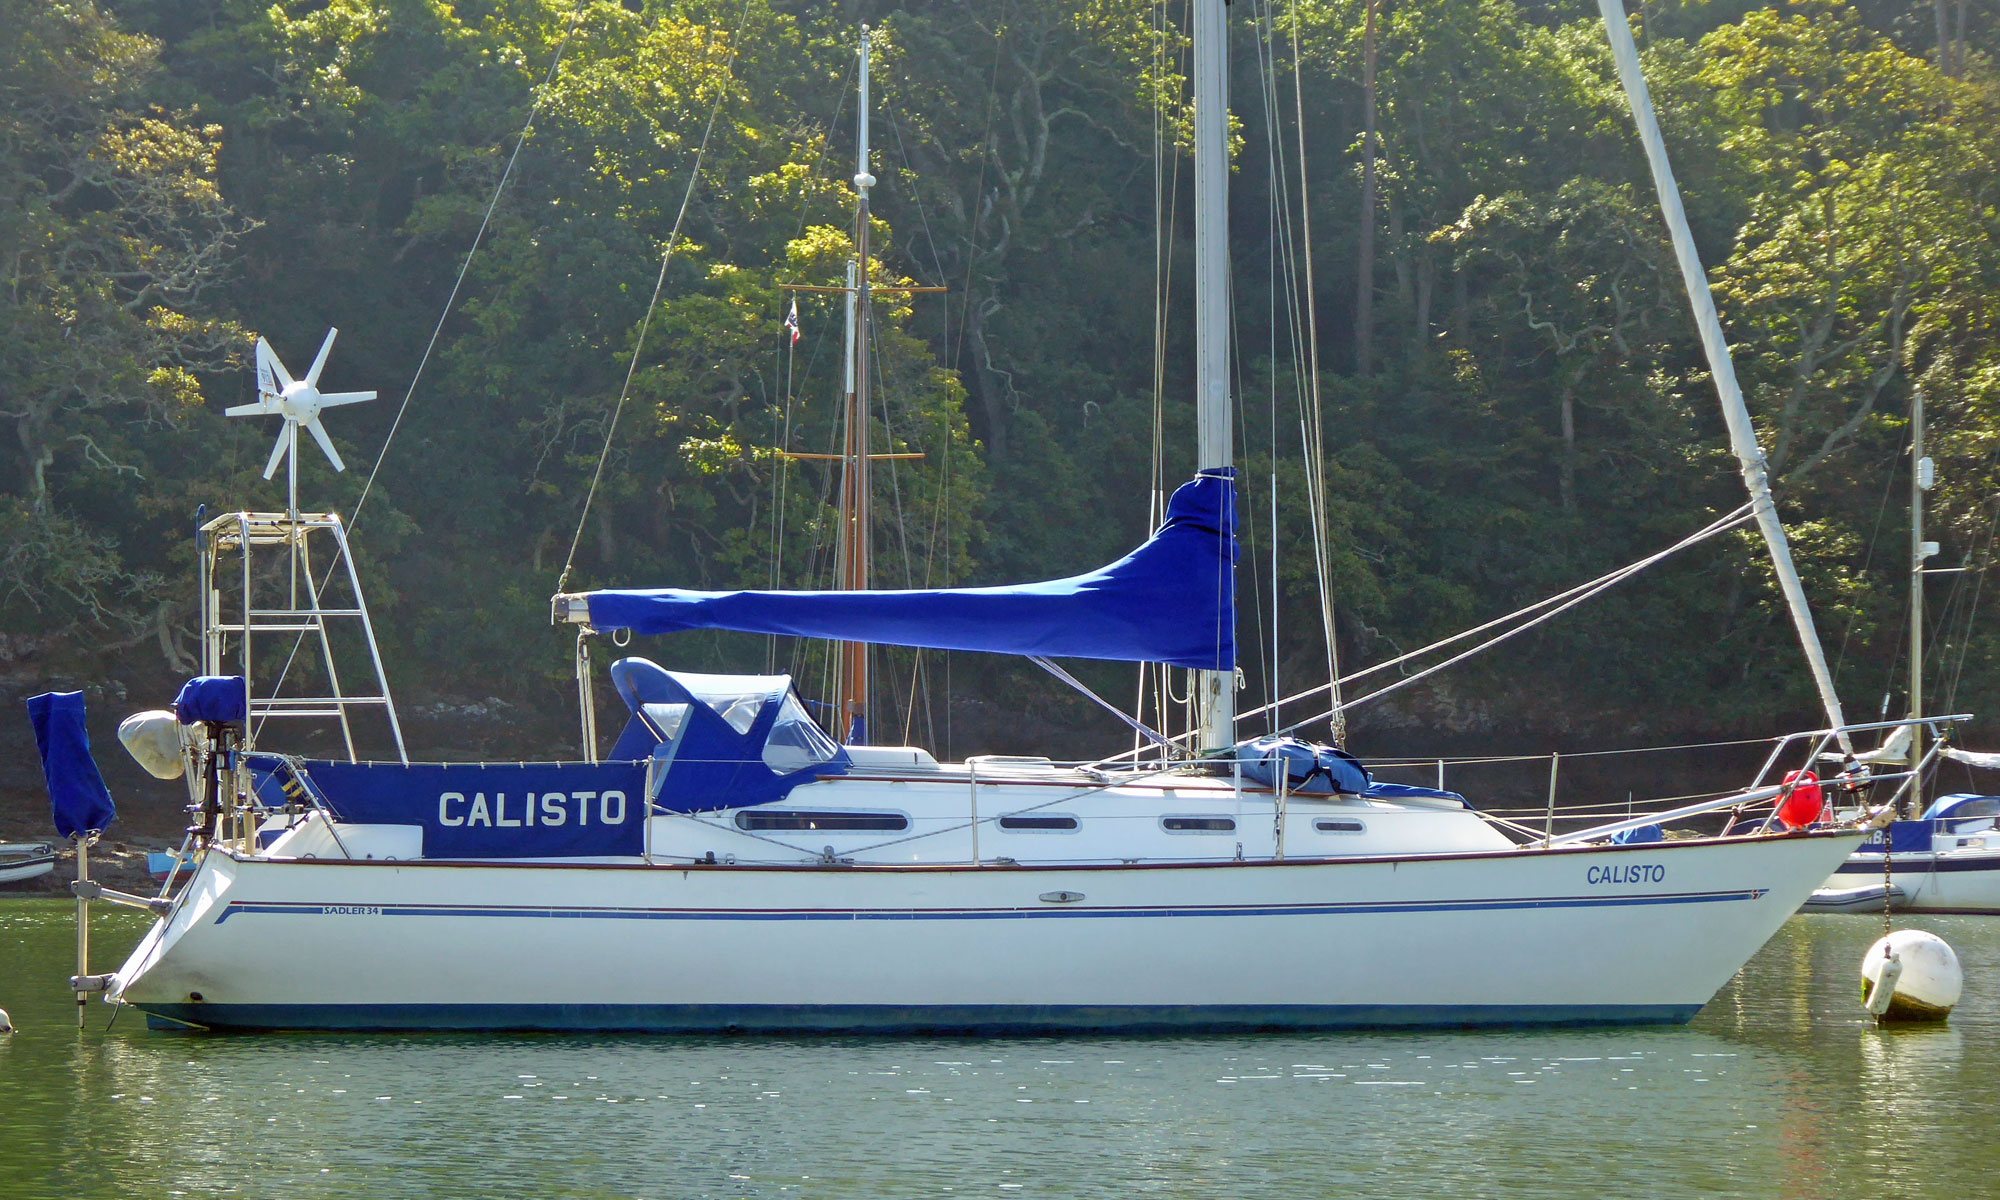 'Calisto', a Sadler 34 cruising yacht on a mooring ball on the River Yealm in Devon, UK